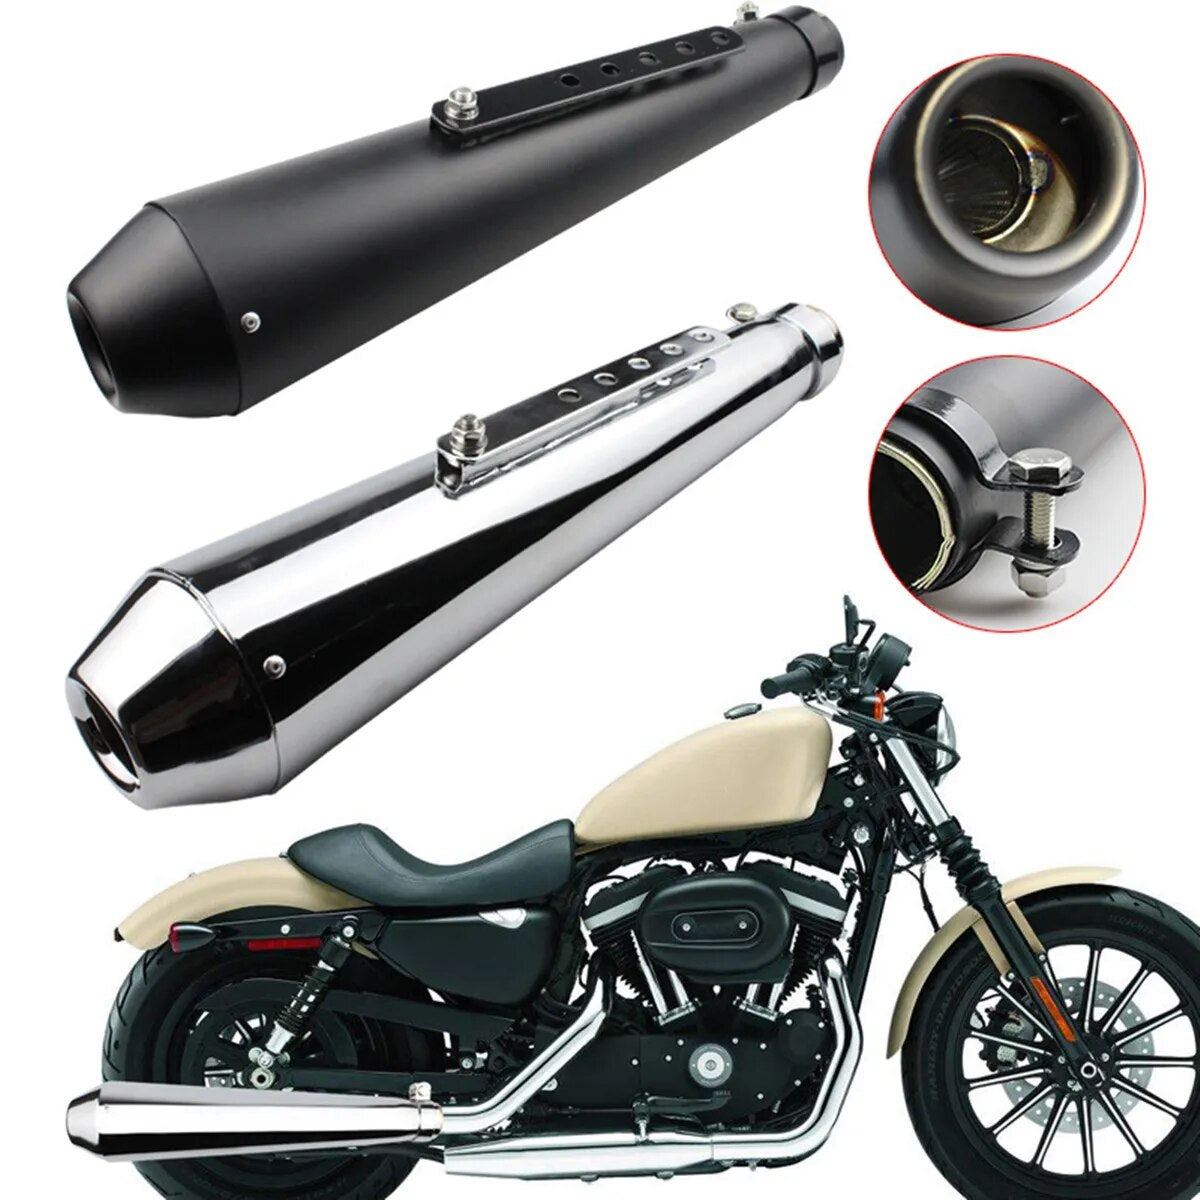 2pc Universal Motorcycle Exhaust Pipe Cafe Racer Modified Tail Exhaust System with Sliding Bracket Matte For Honda/Yamaha/Suzuki